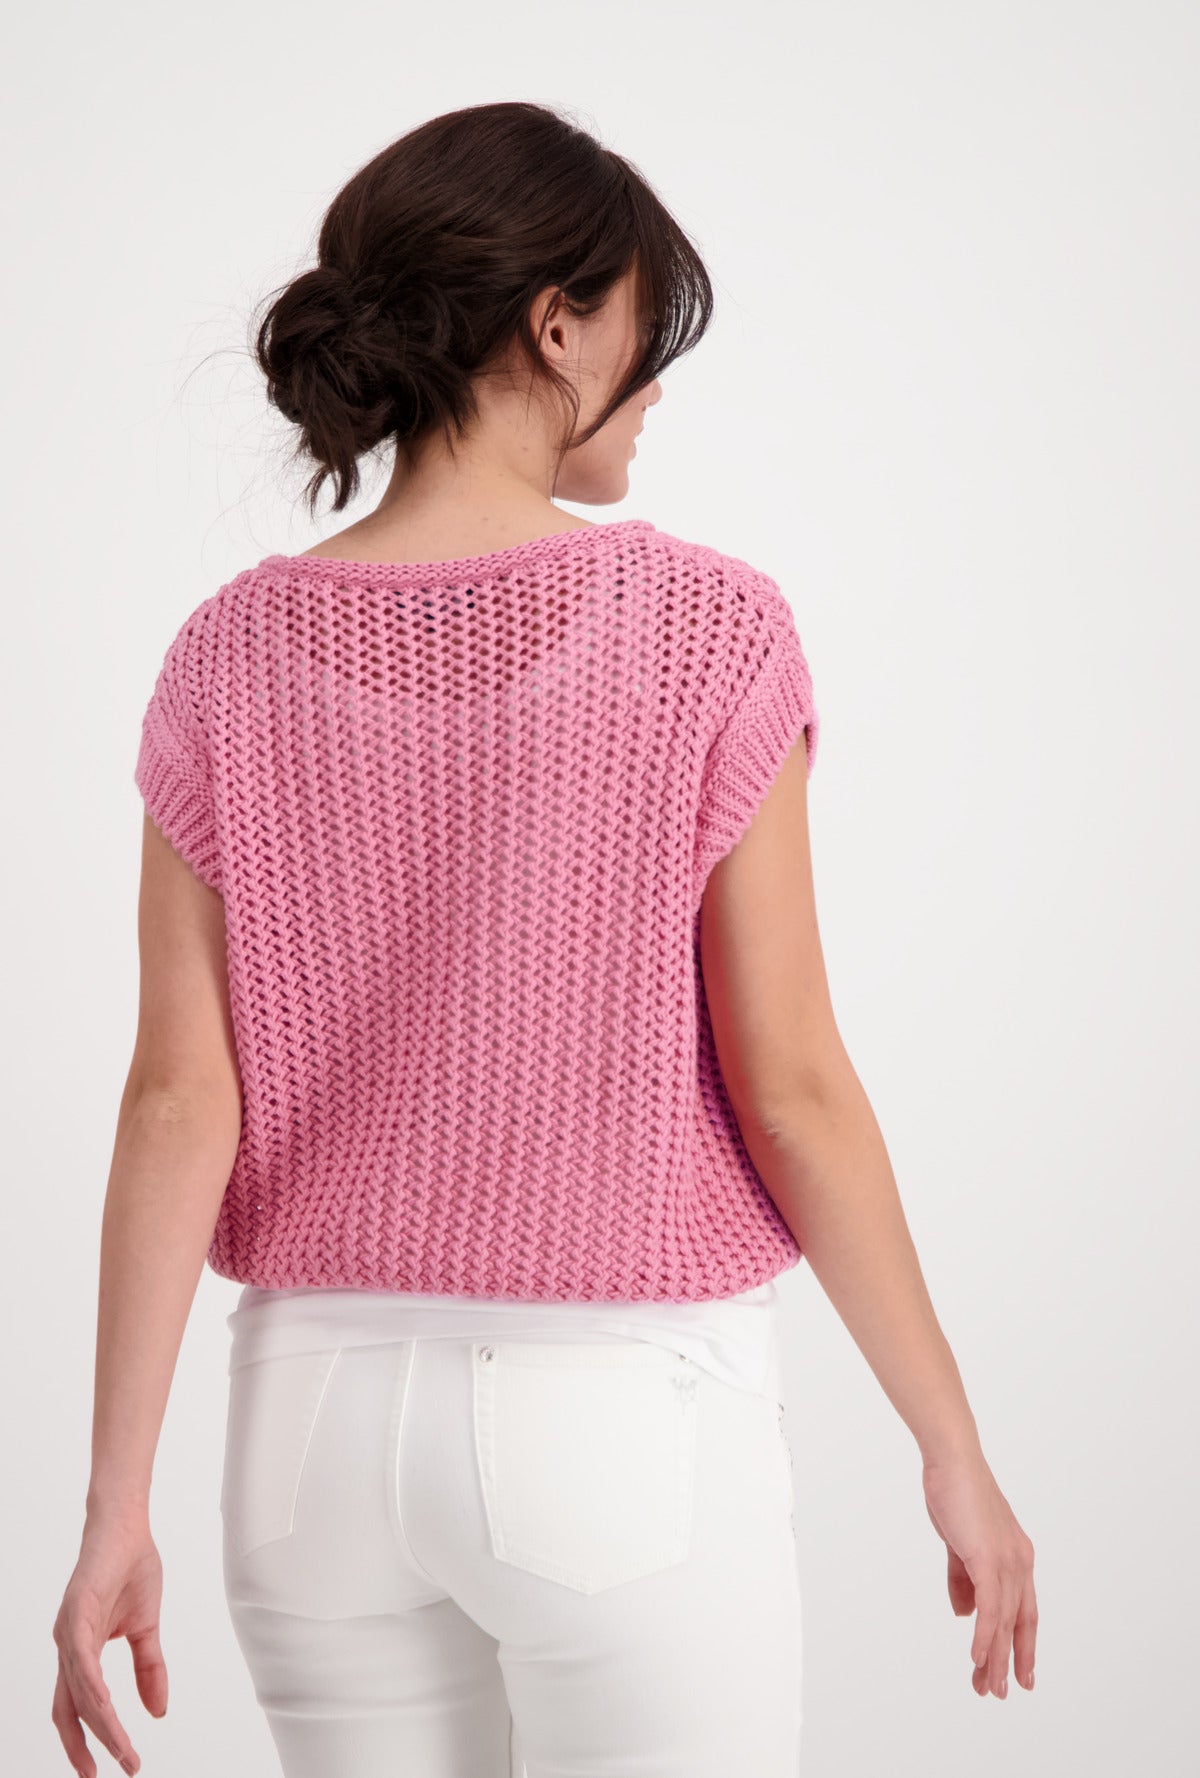 Pullover, pink